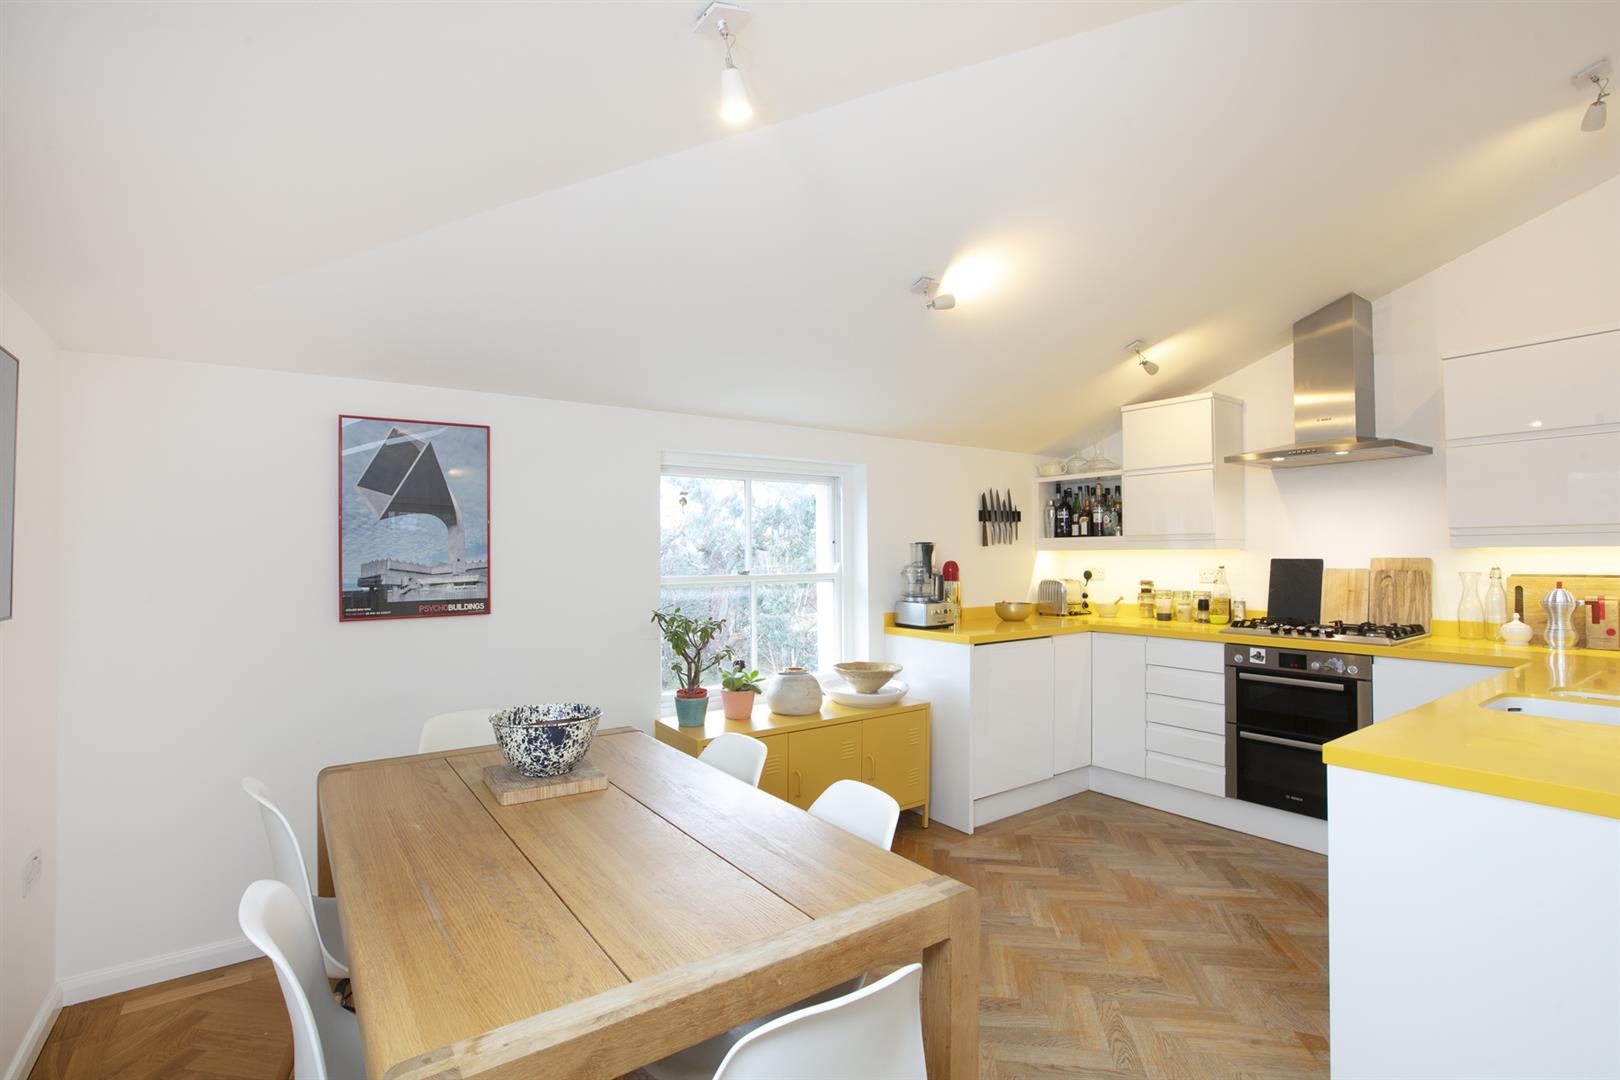 Flat - Conversion For Sale in Holly Grove, Peckham, SE15 893 view19